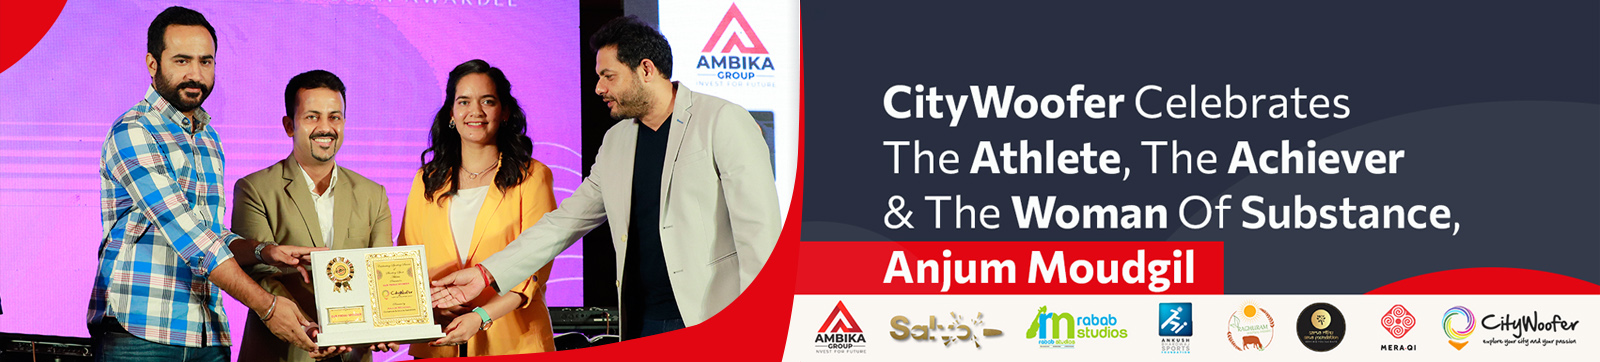 CityWoofer Celebrates The Athlete, The Achiever & The Woman Of Substance, Anjum Moudgil